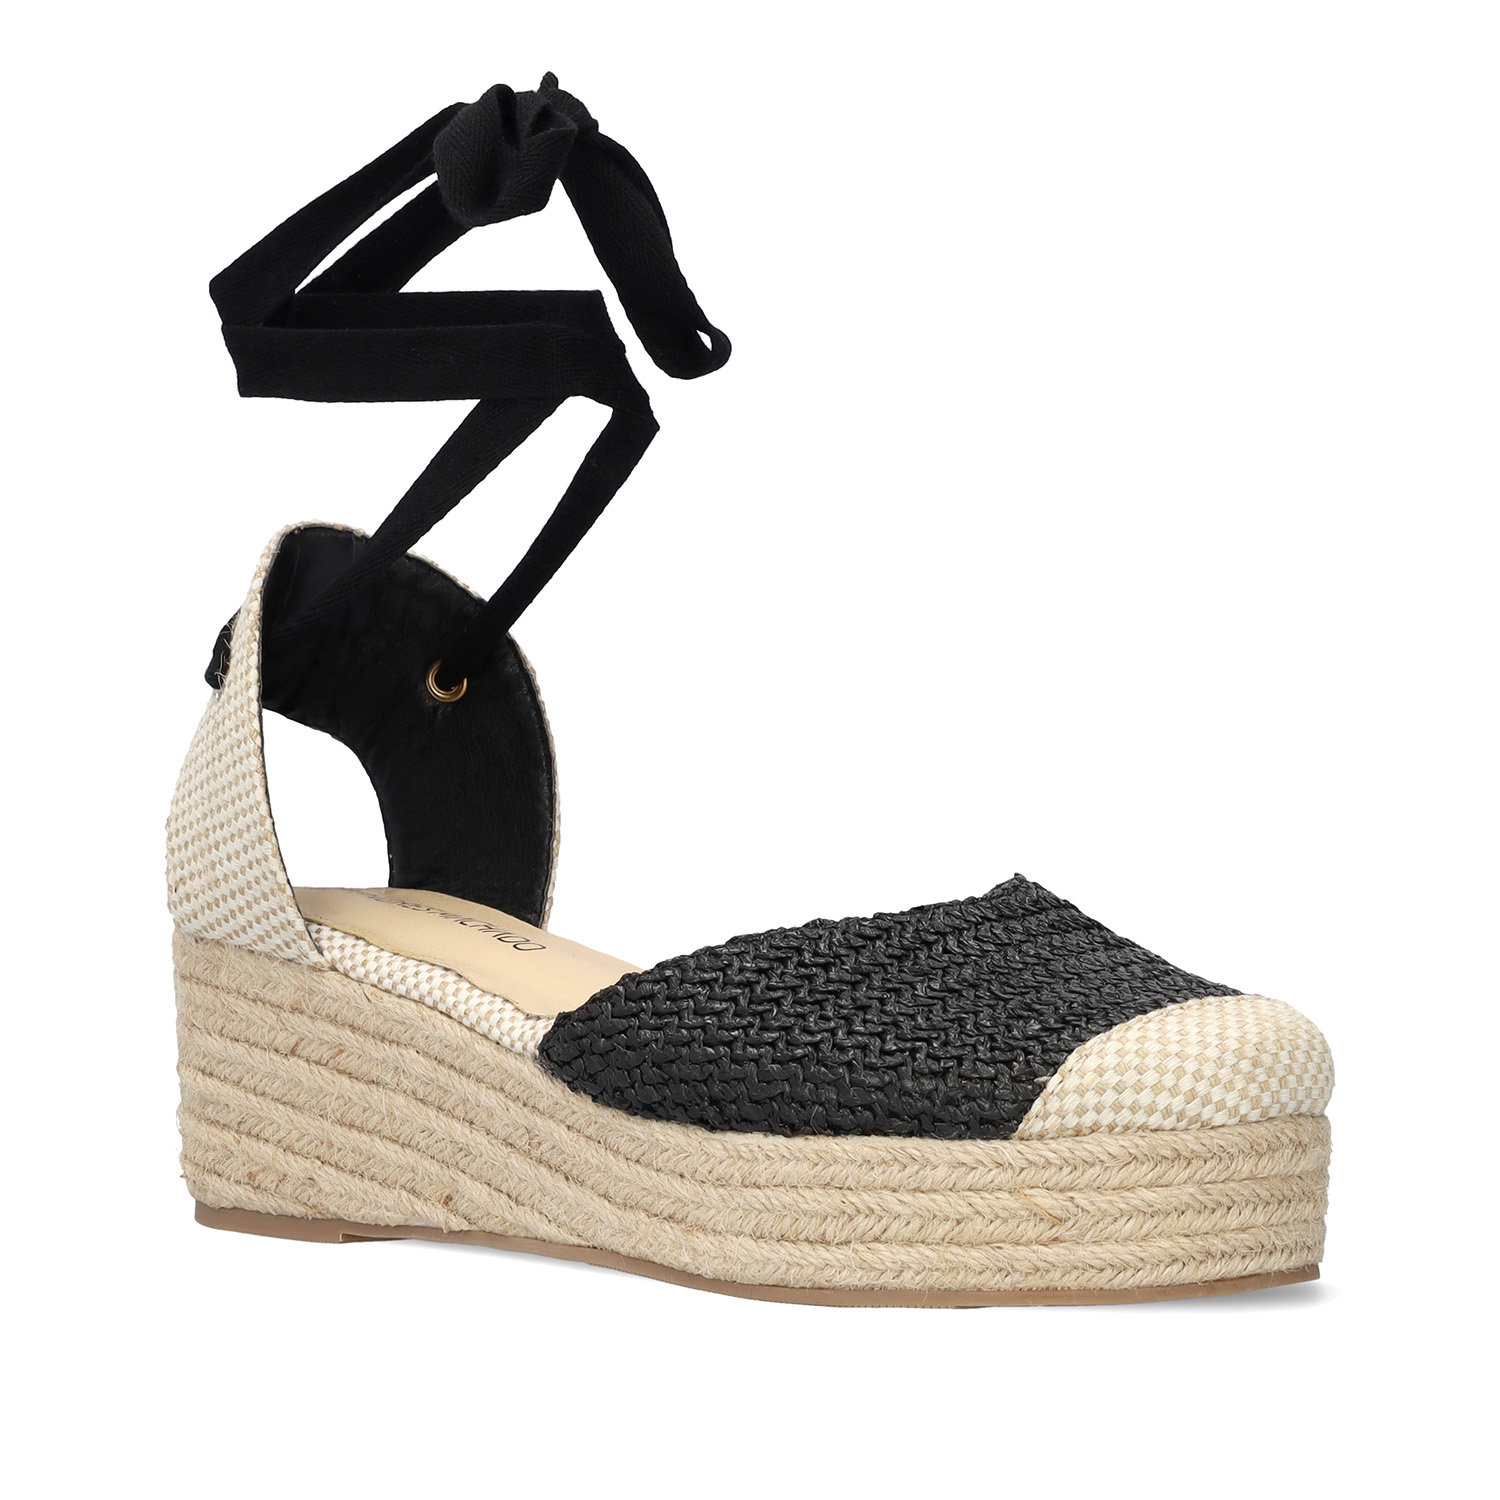 Wedge sandals in black-colored fabric with jute wedge 